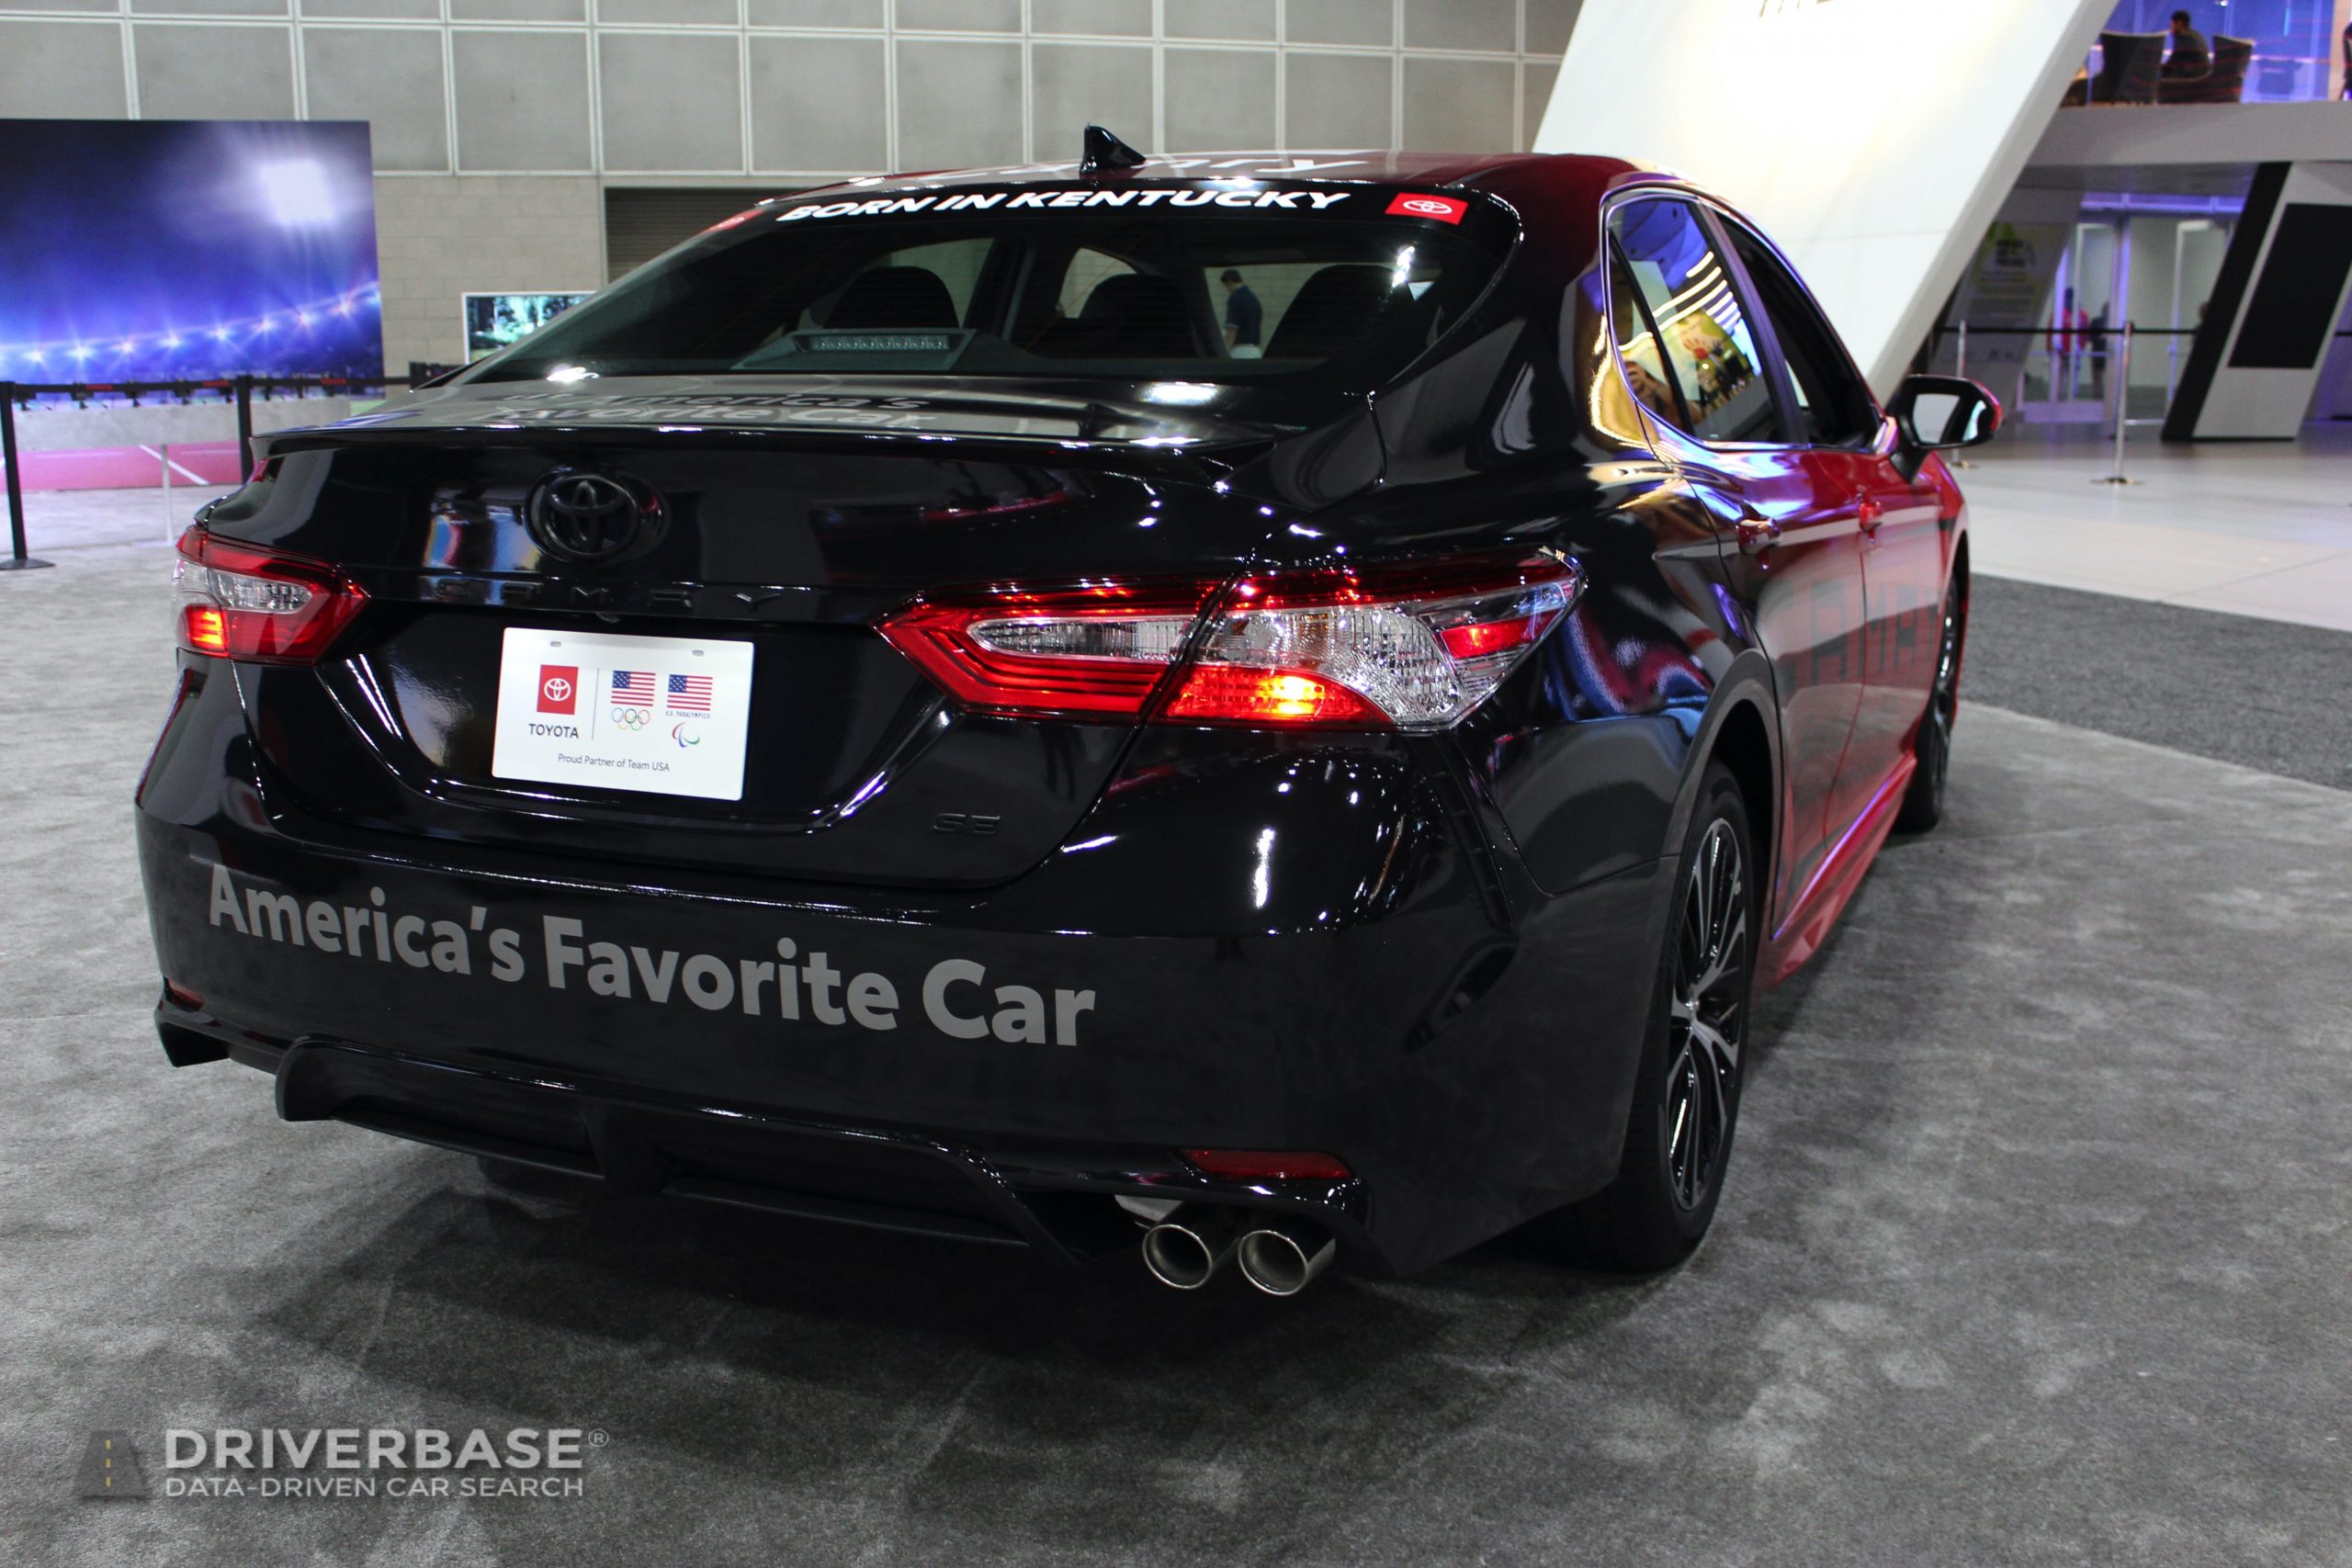 2020 Toyota Camry at the 2019 Los Angeles Auto Show